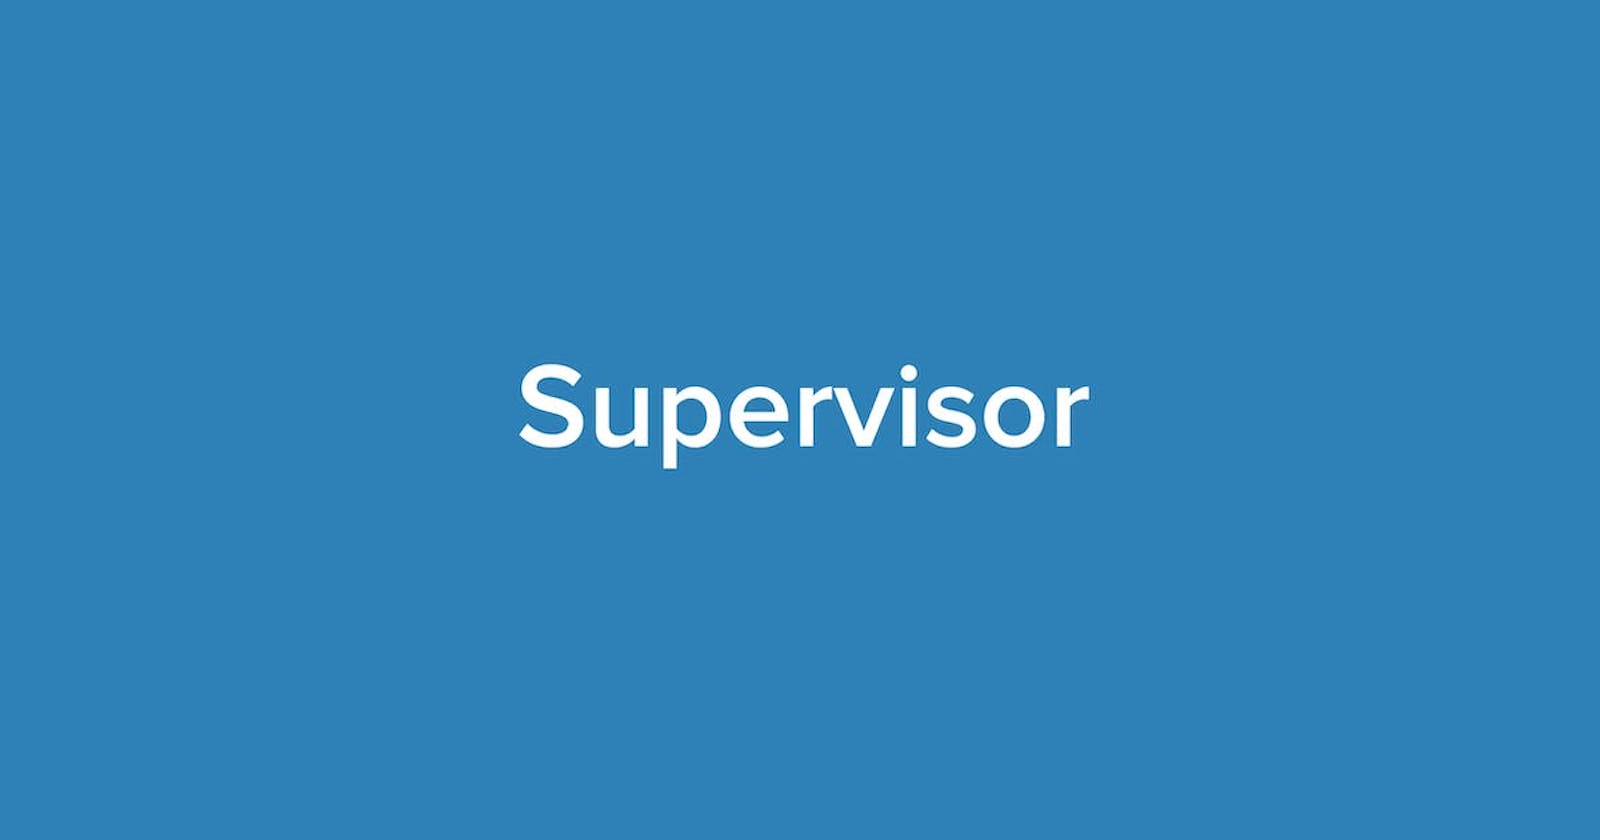 Supercharge Your Process Management Using Supervisor